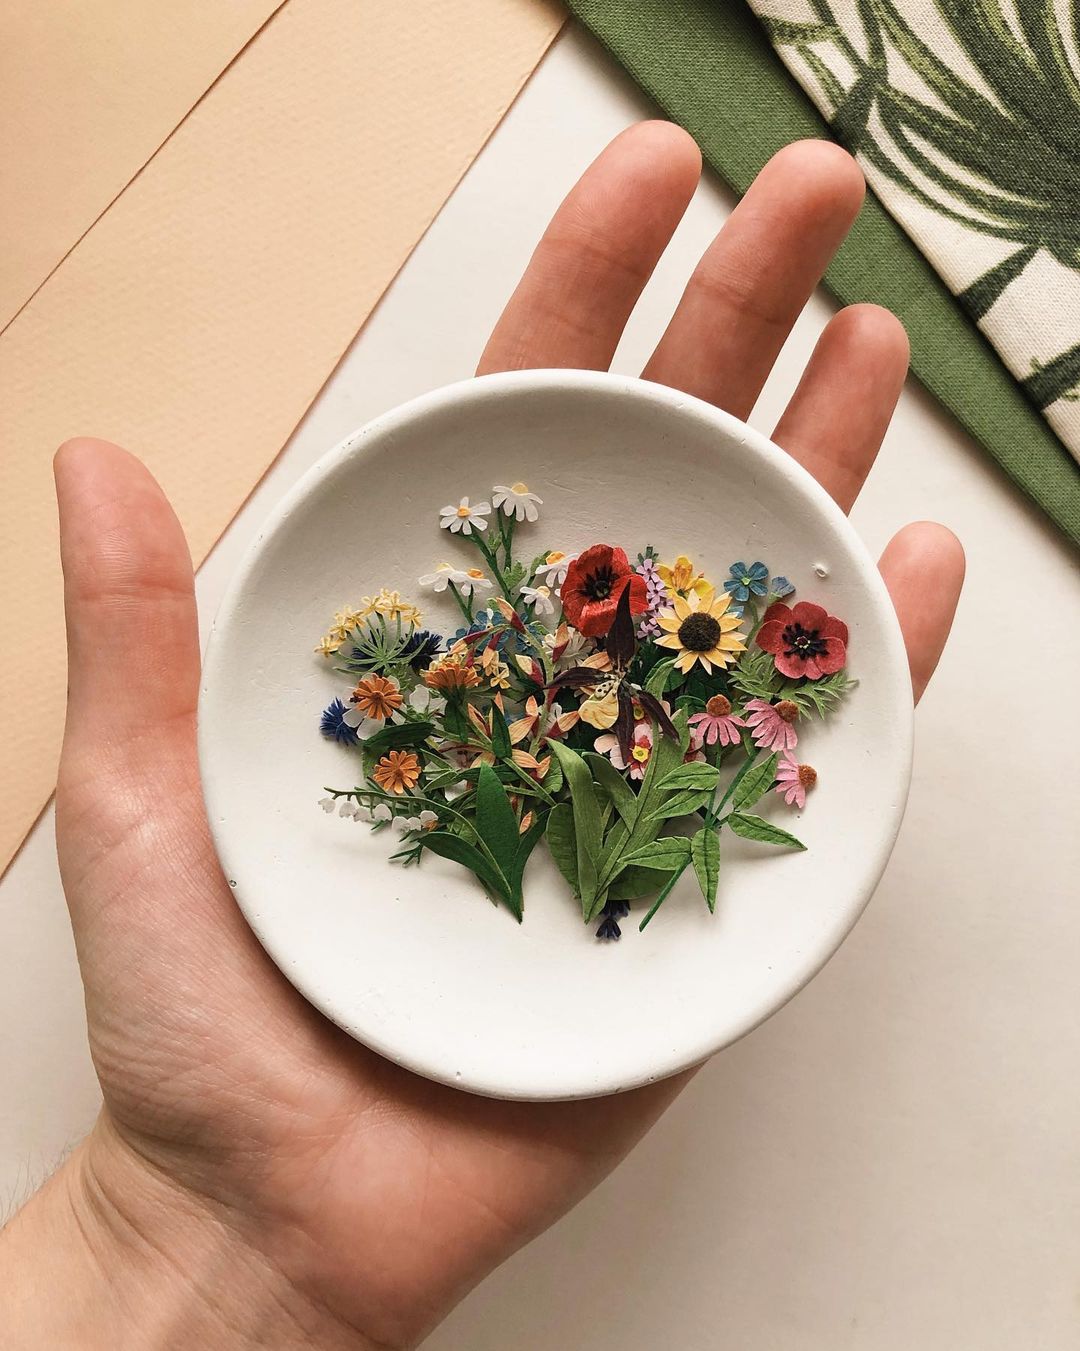 Tania Lissova's Endearing Tiny Paper Plants Will Stay In Bloom Forever